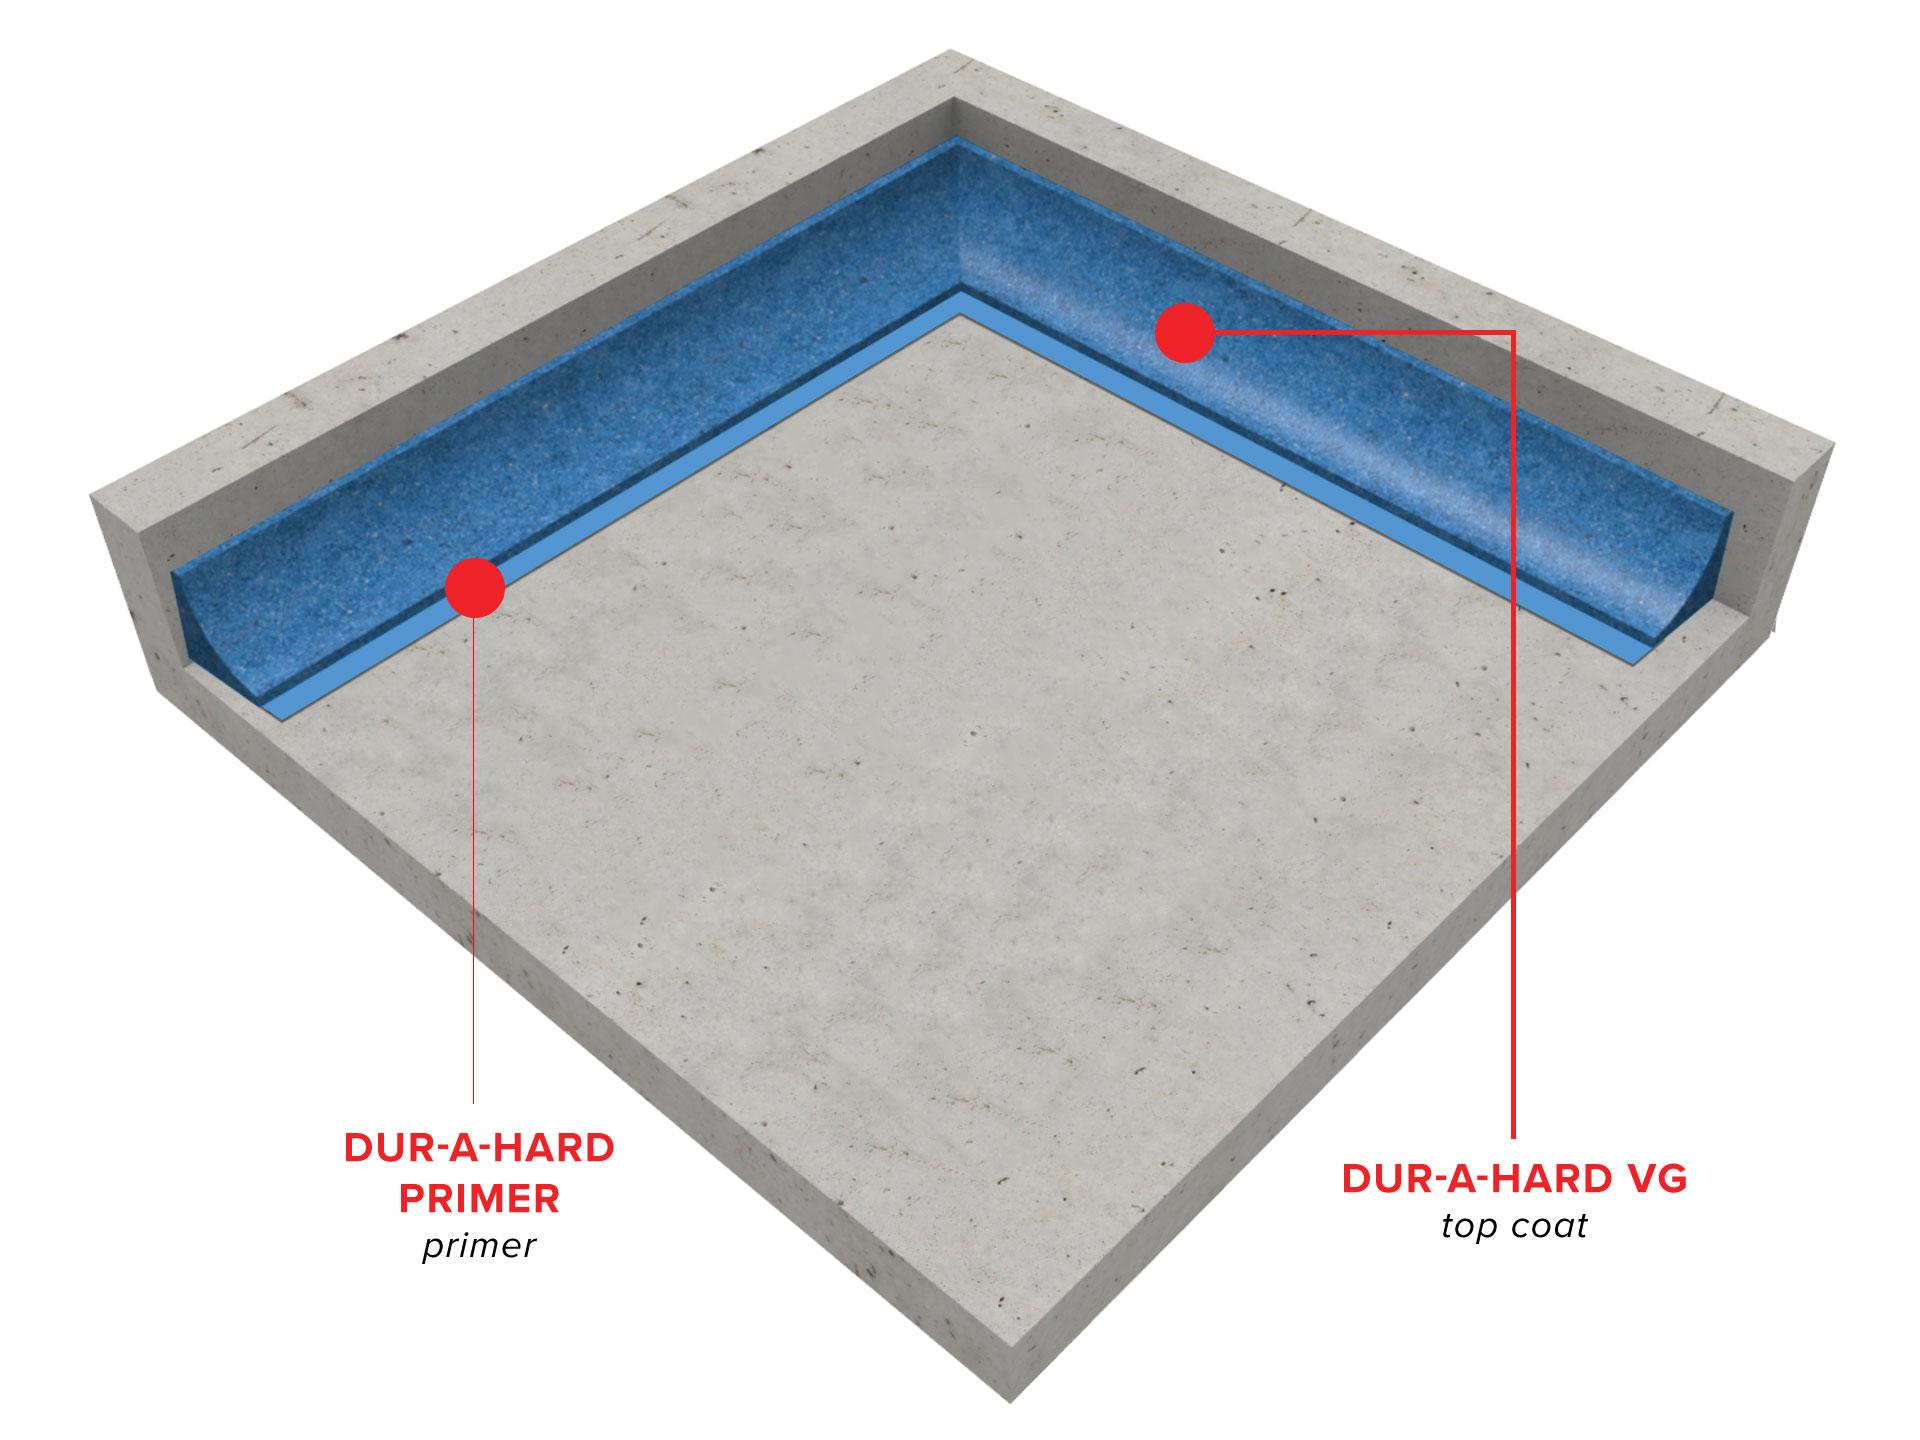 dur-a-hard-vg-vertical-grade-cementitious-urethane-cove-trench-coating-system1574282256.jpg